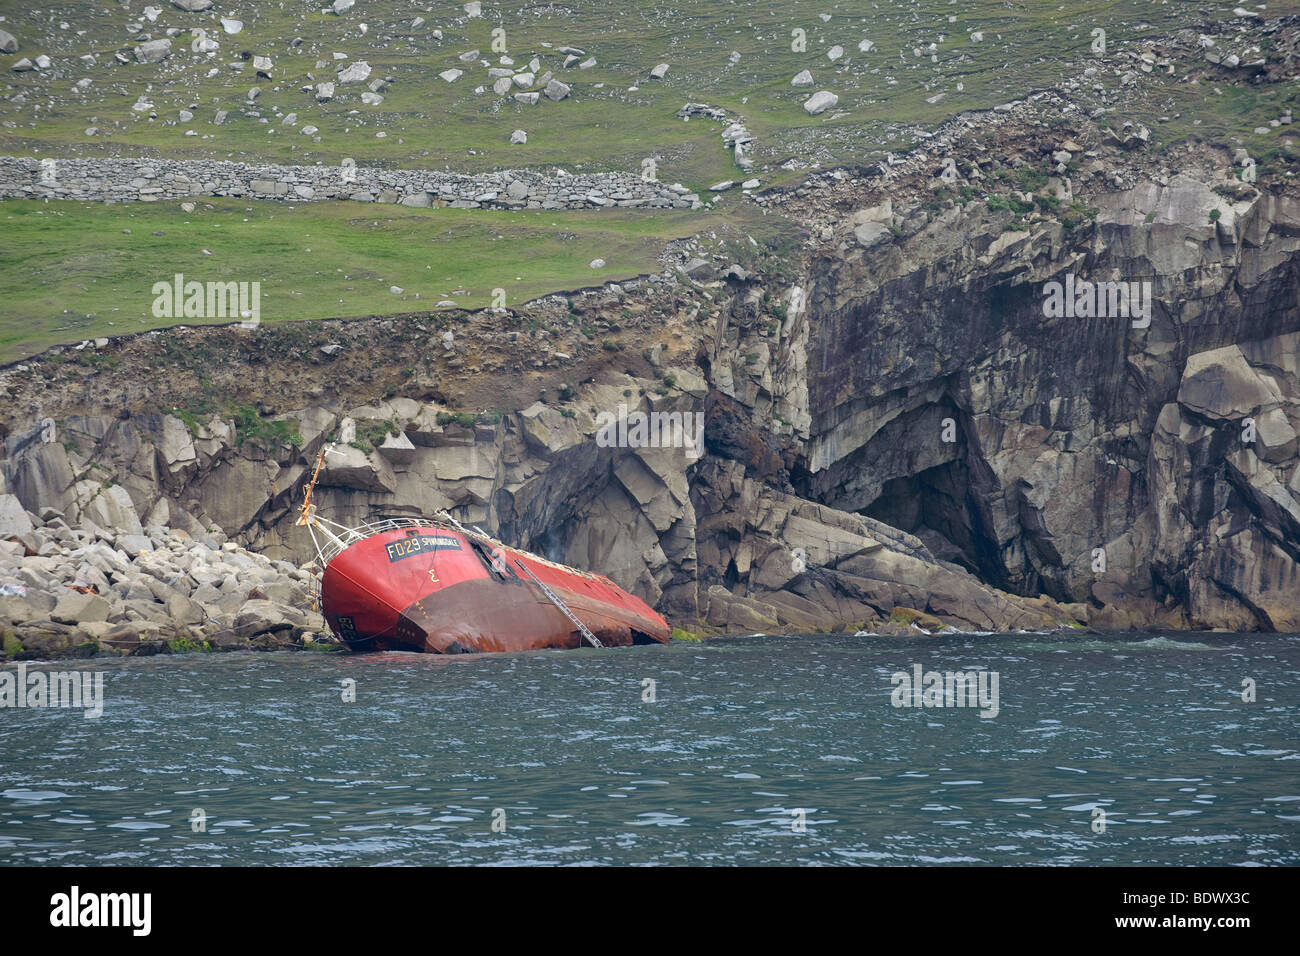 Wreck of the Spinningdale aground on island of Hirta in the Saint Kilda archipelago, Scotland. June 2009. Stock Photo